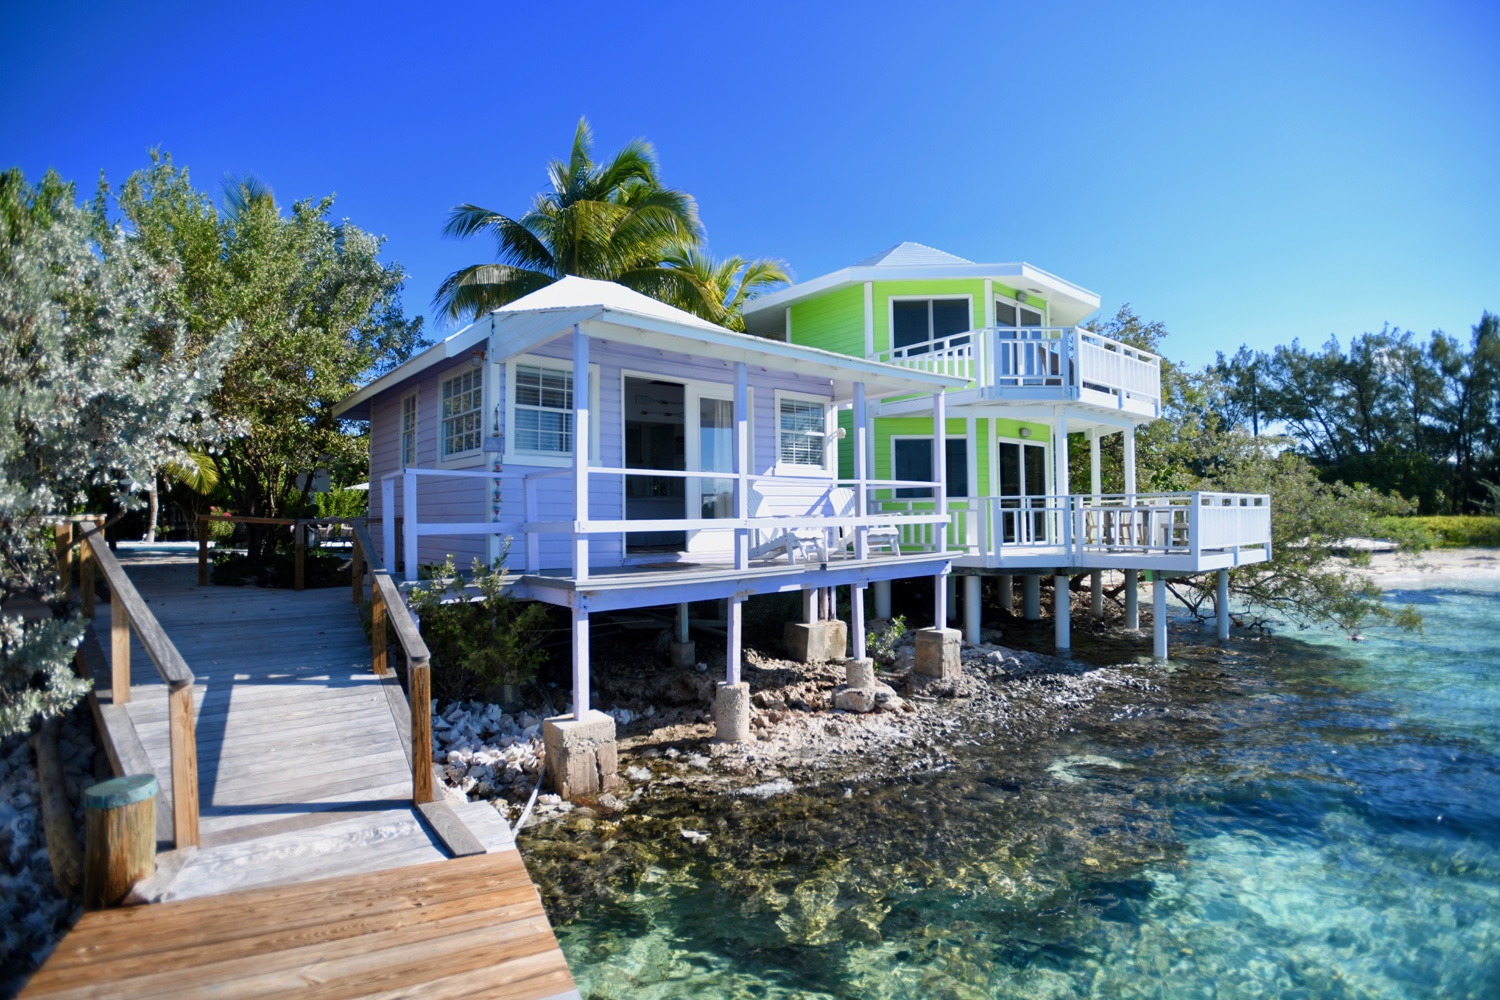 Waterfront Vacation Rentals Staniel Cay